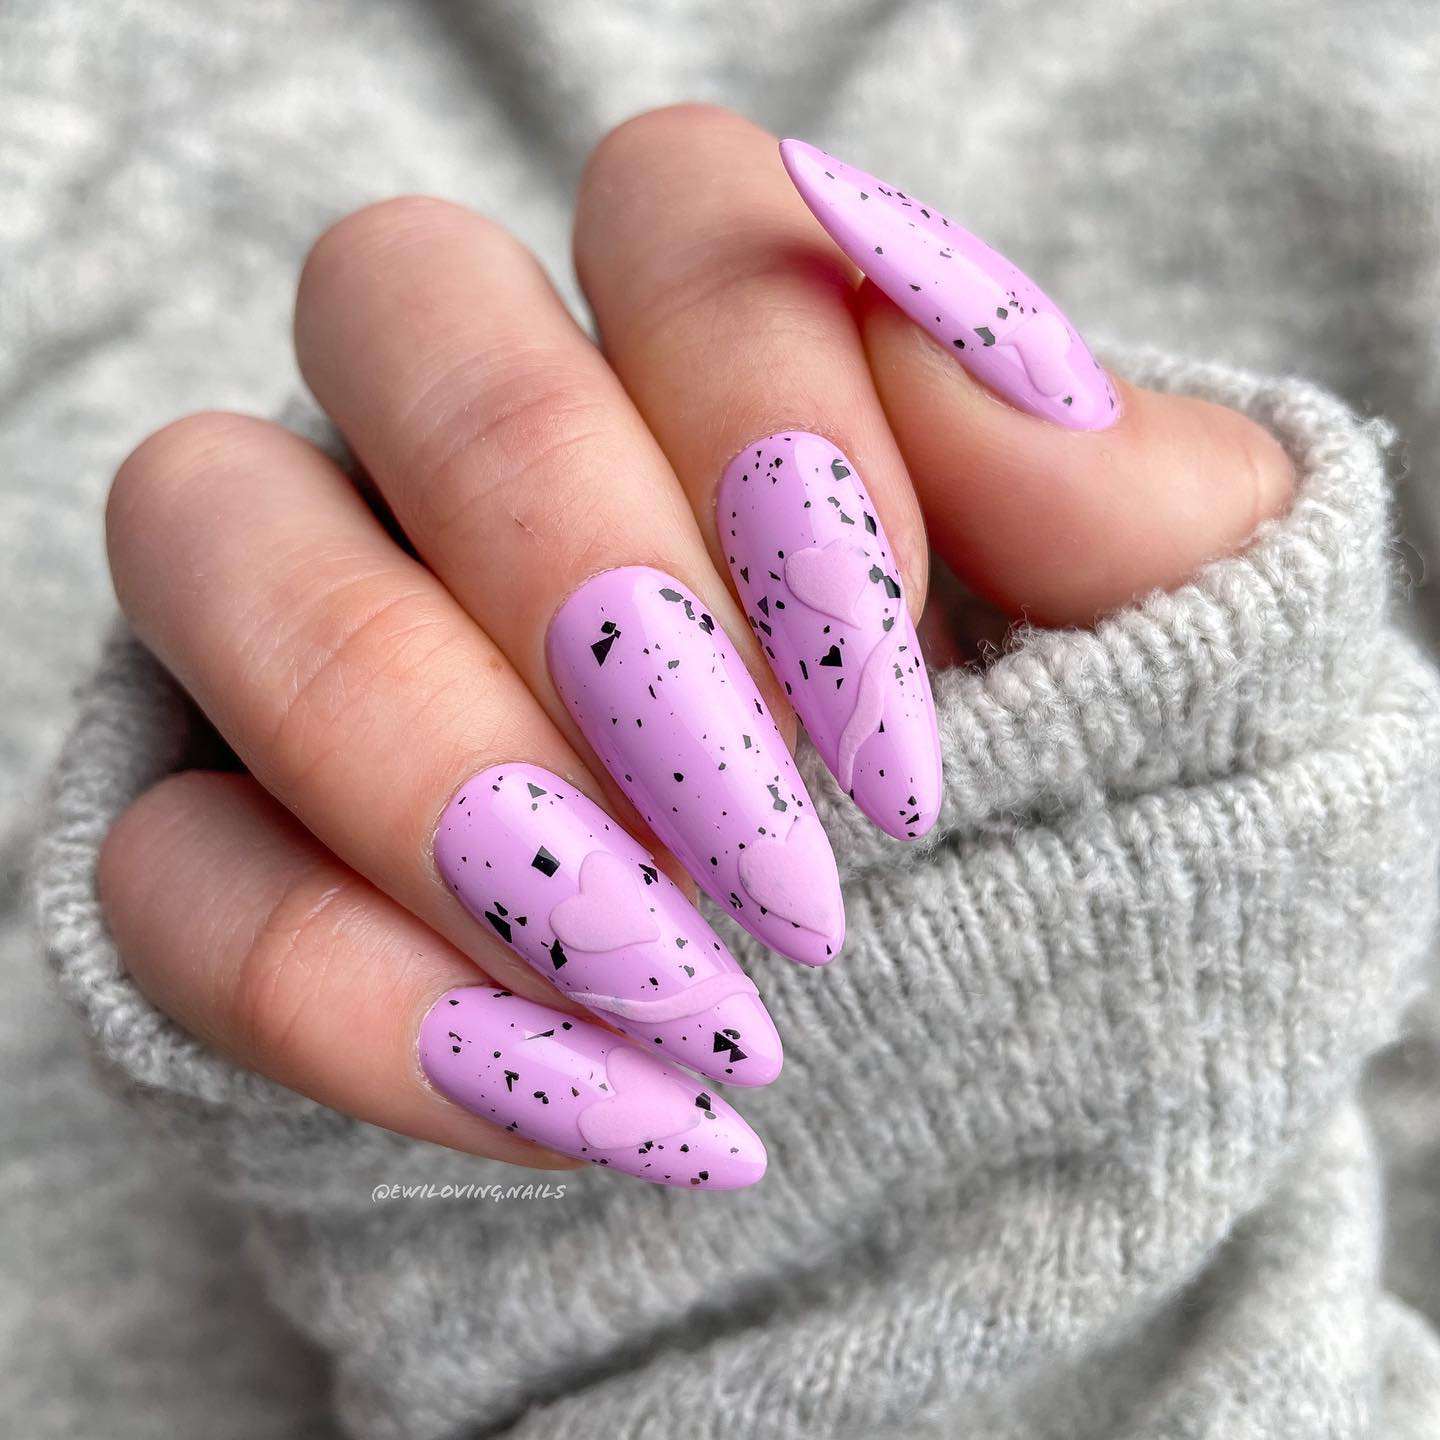 35 Nail Designs For 2022 You’ll Want To Try Immediately images 1